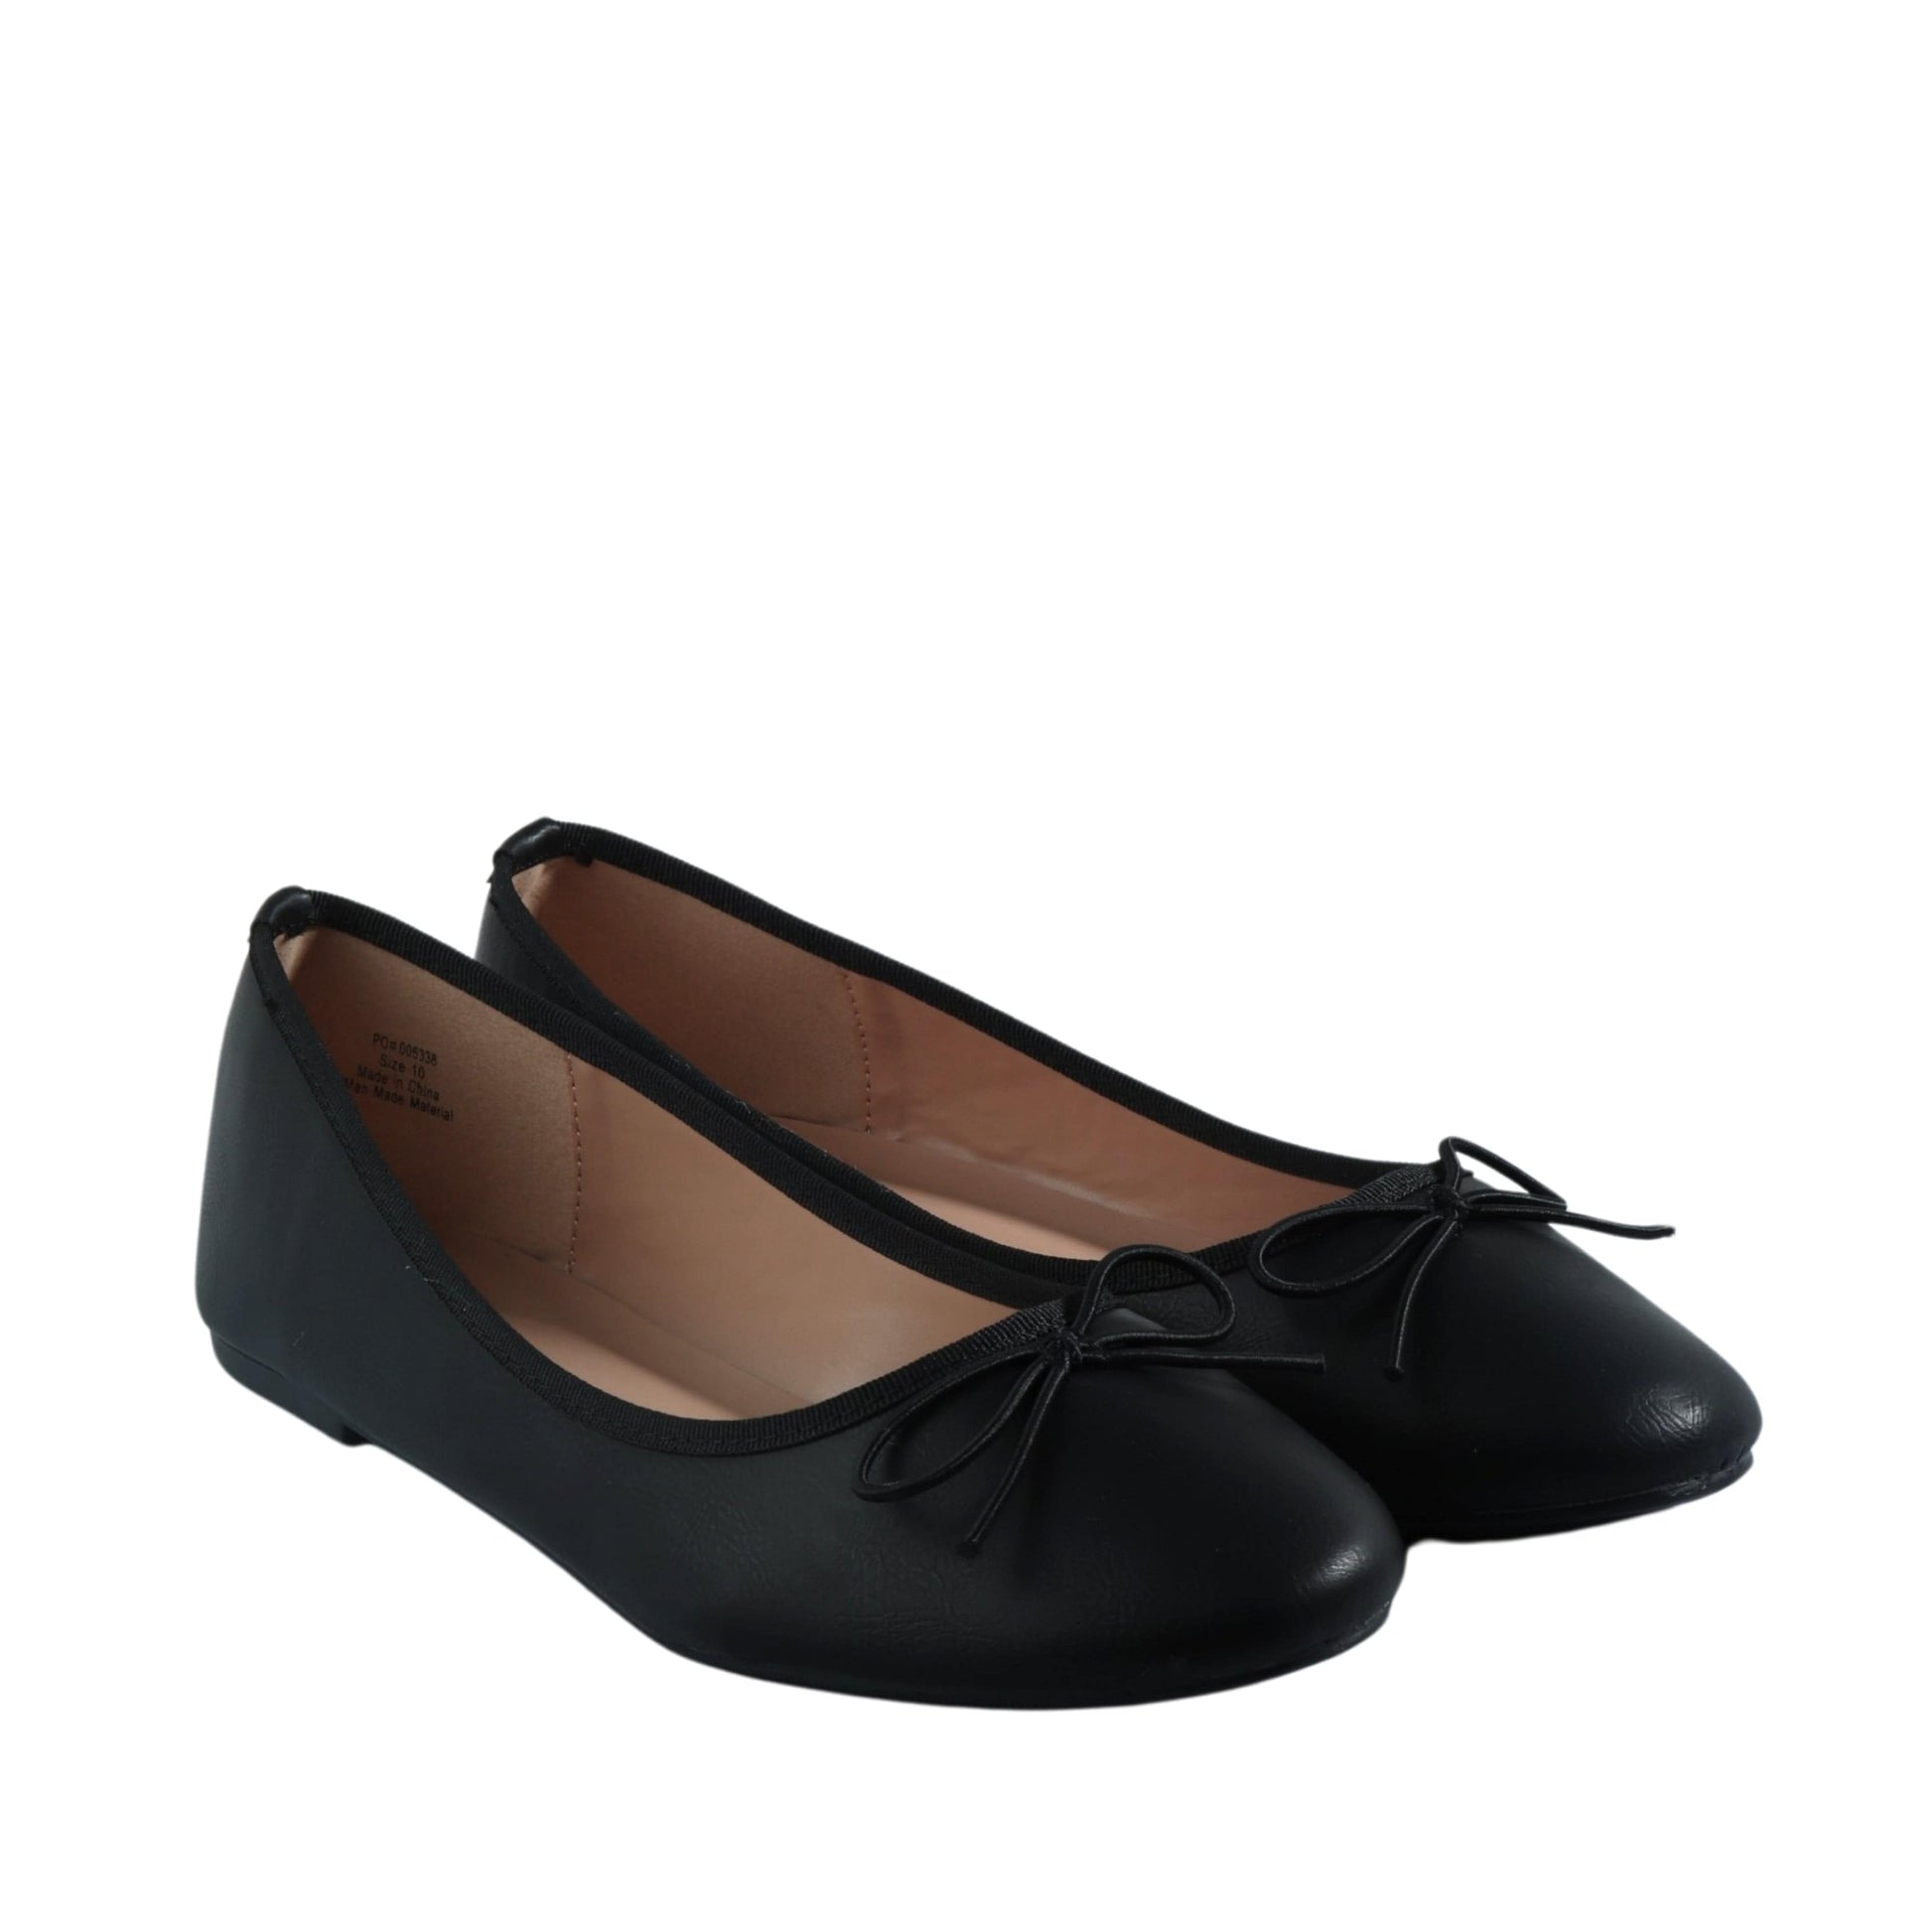 JOURNEE COLLECTION Womens Shoes 41.5 / Black JOURNEE COLLECTION - Vika Flat